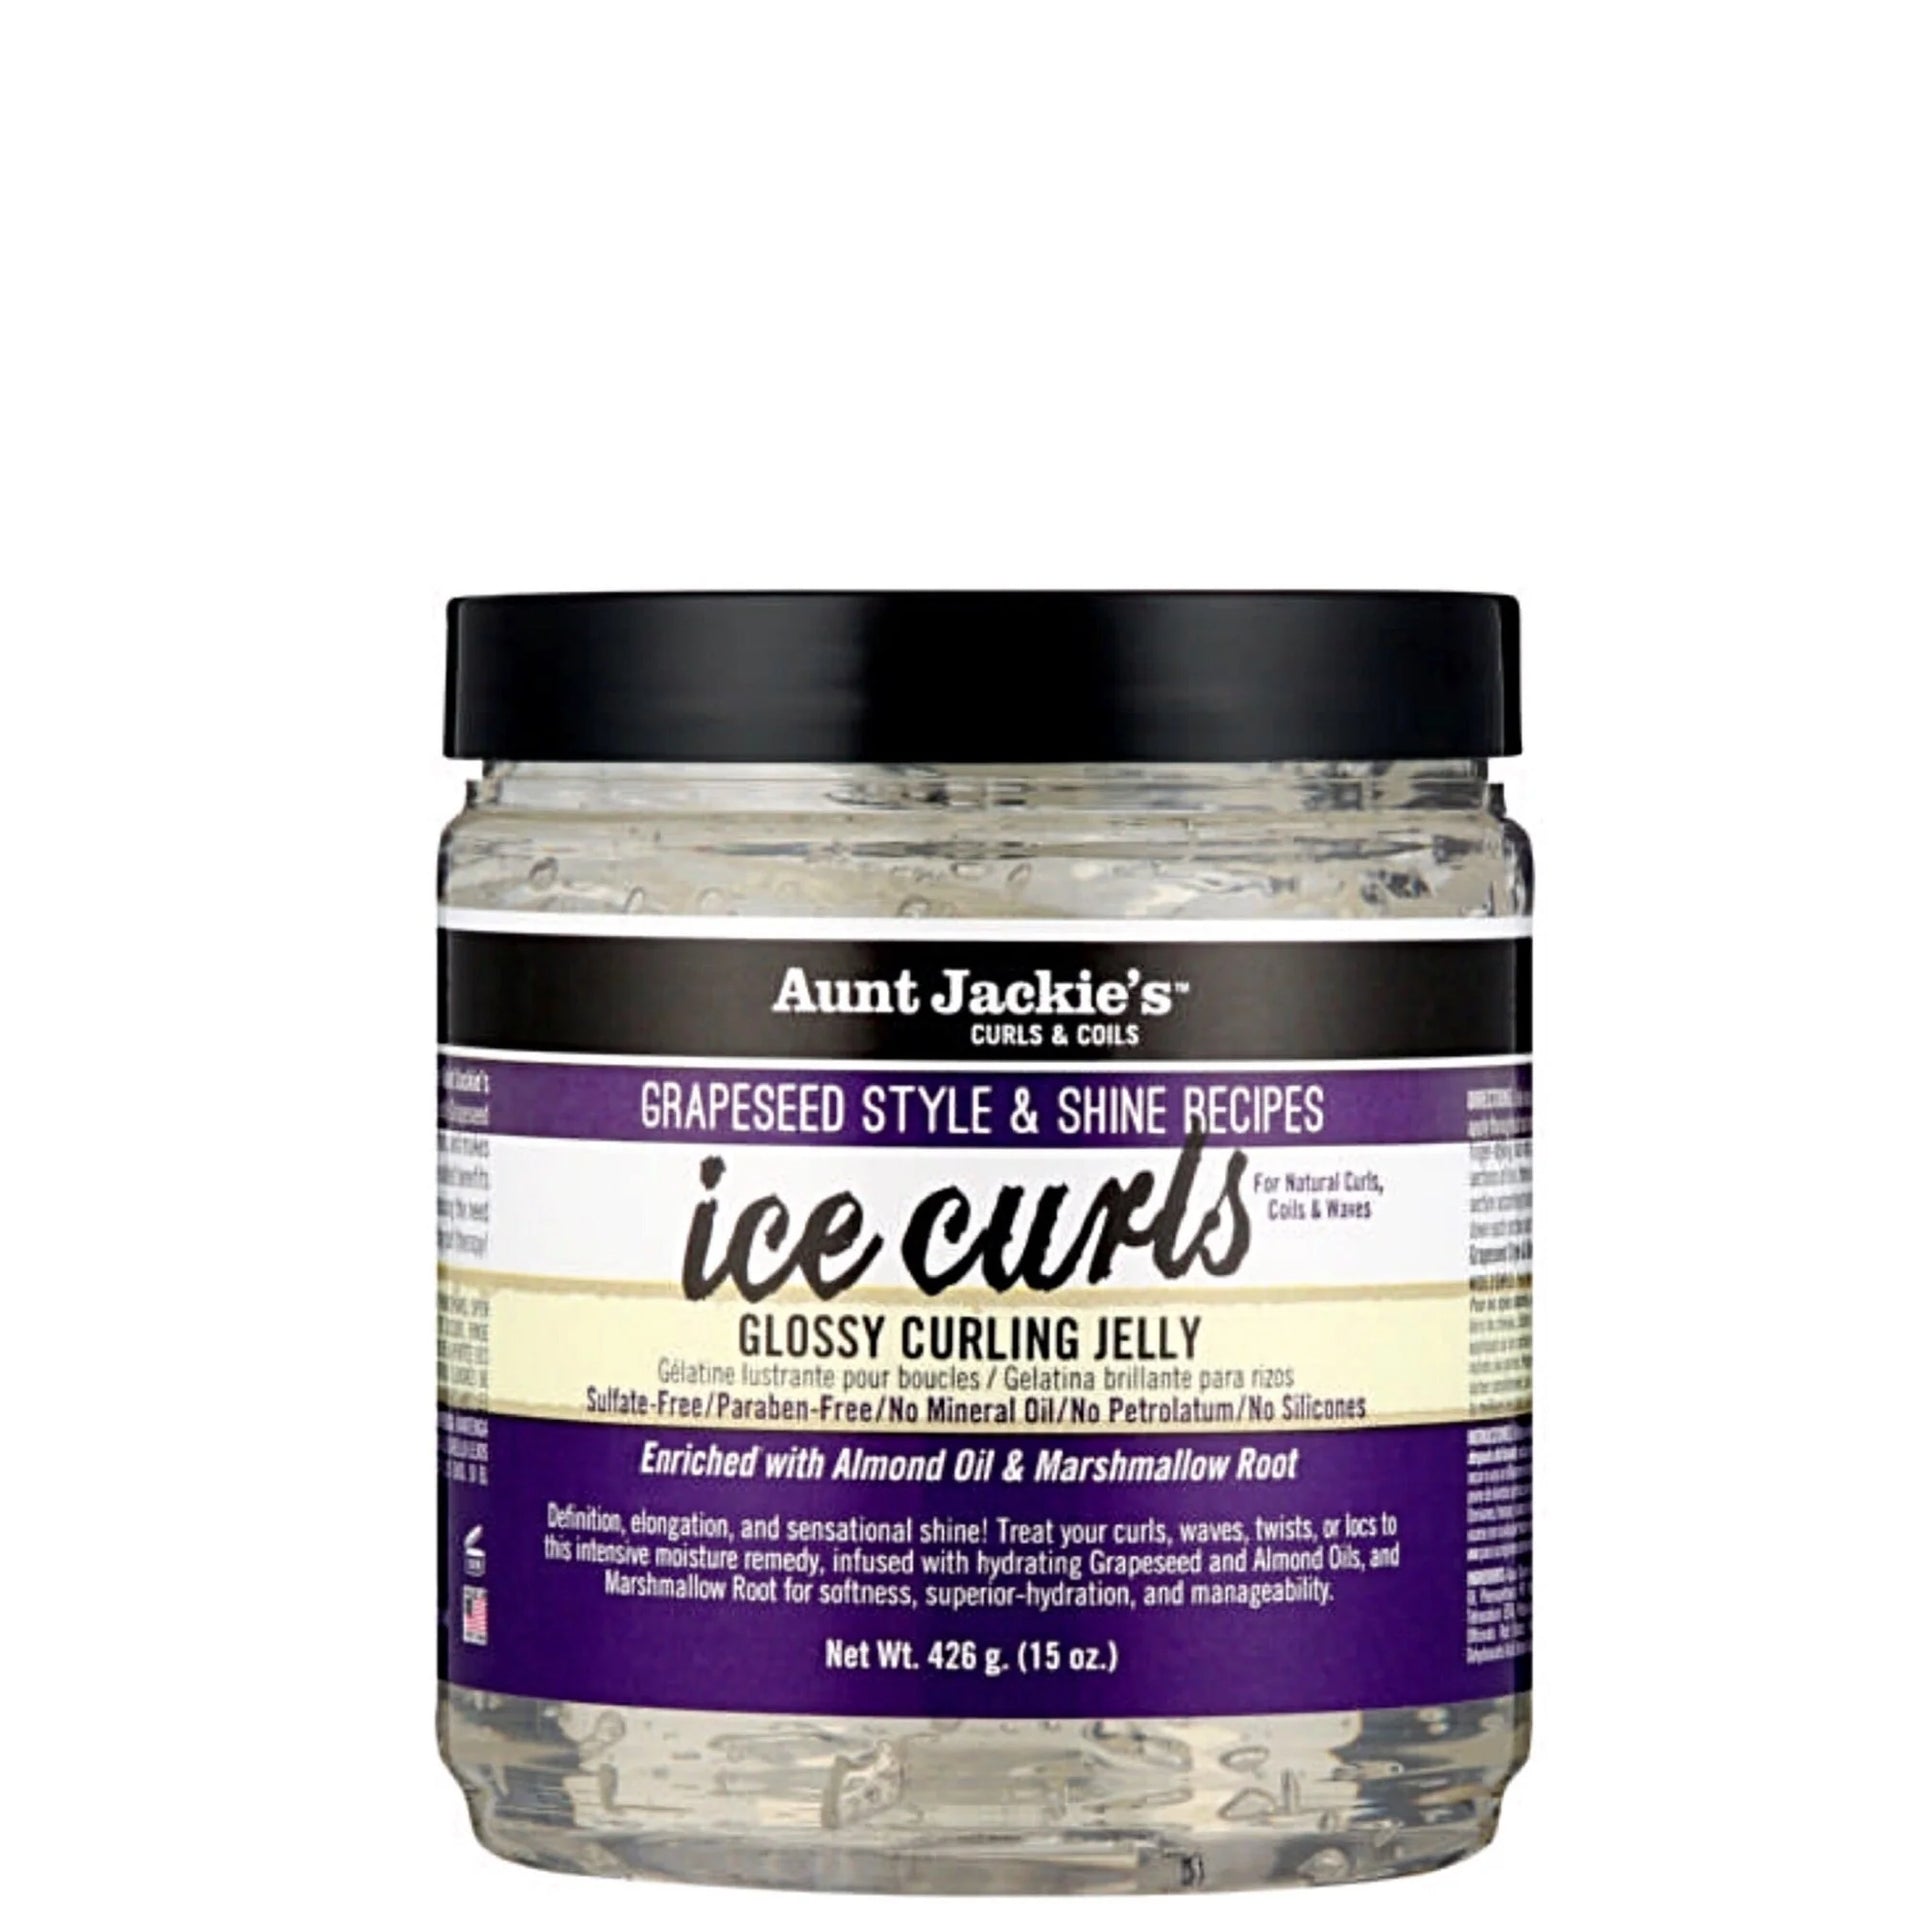 Aunt Jackie's Grapeseed Style and Shine Ice Curls Glossy Curling Jelly 426g